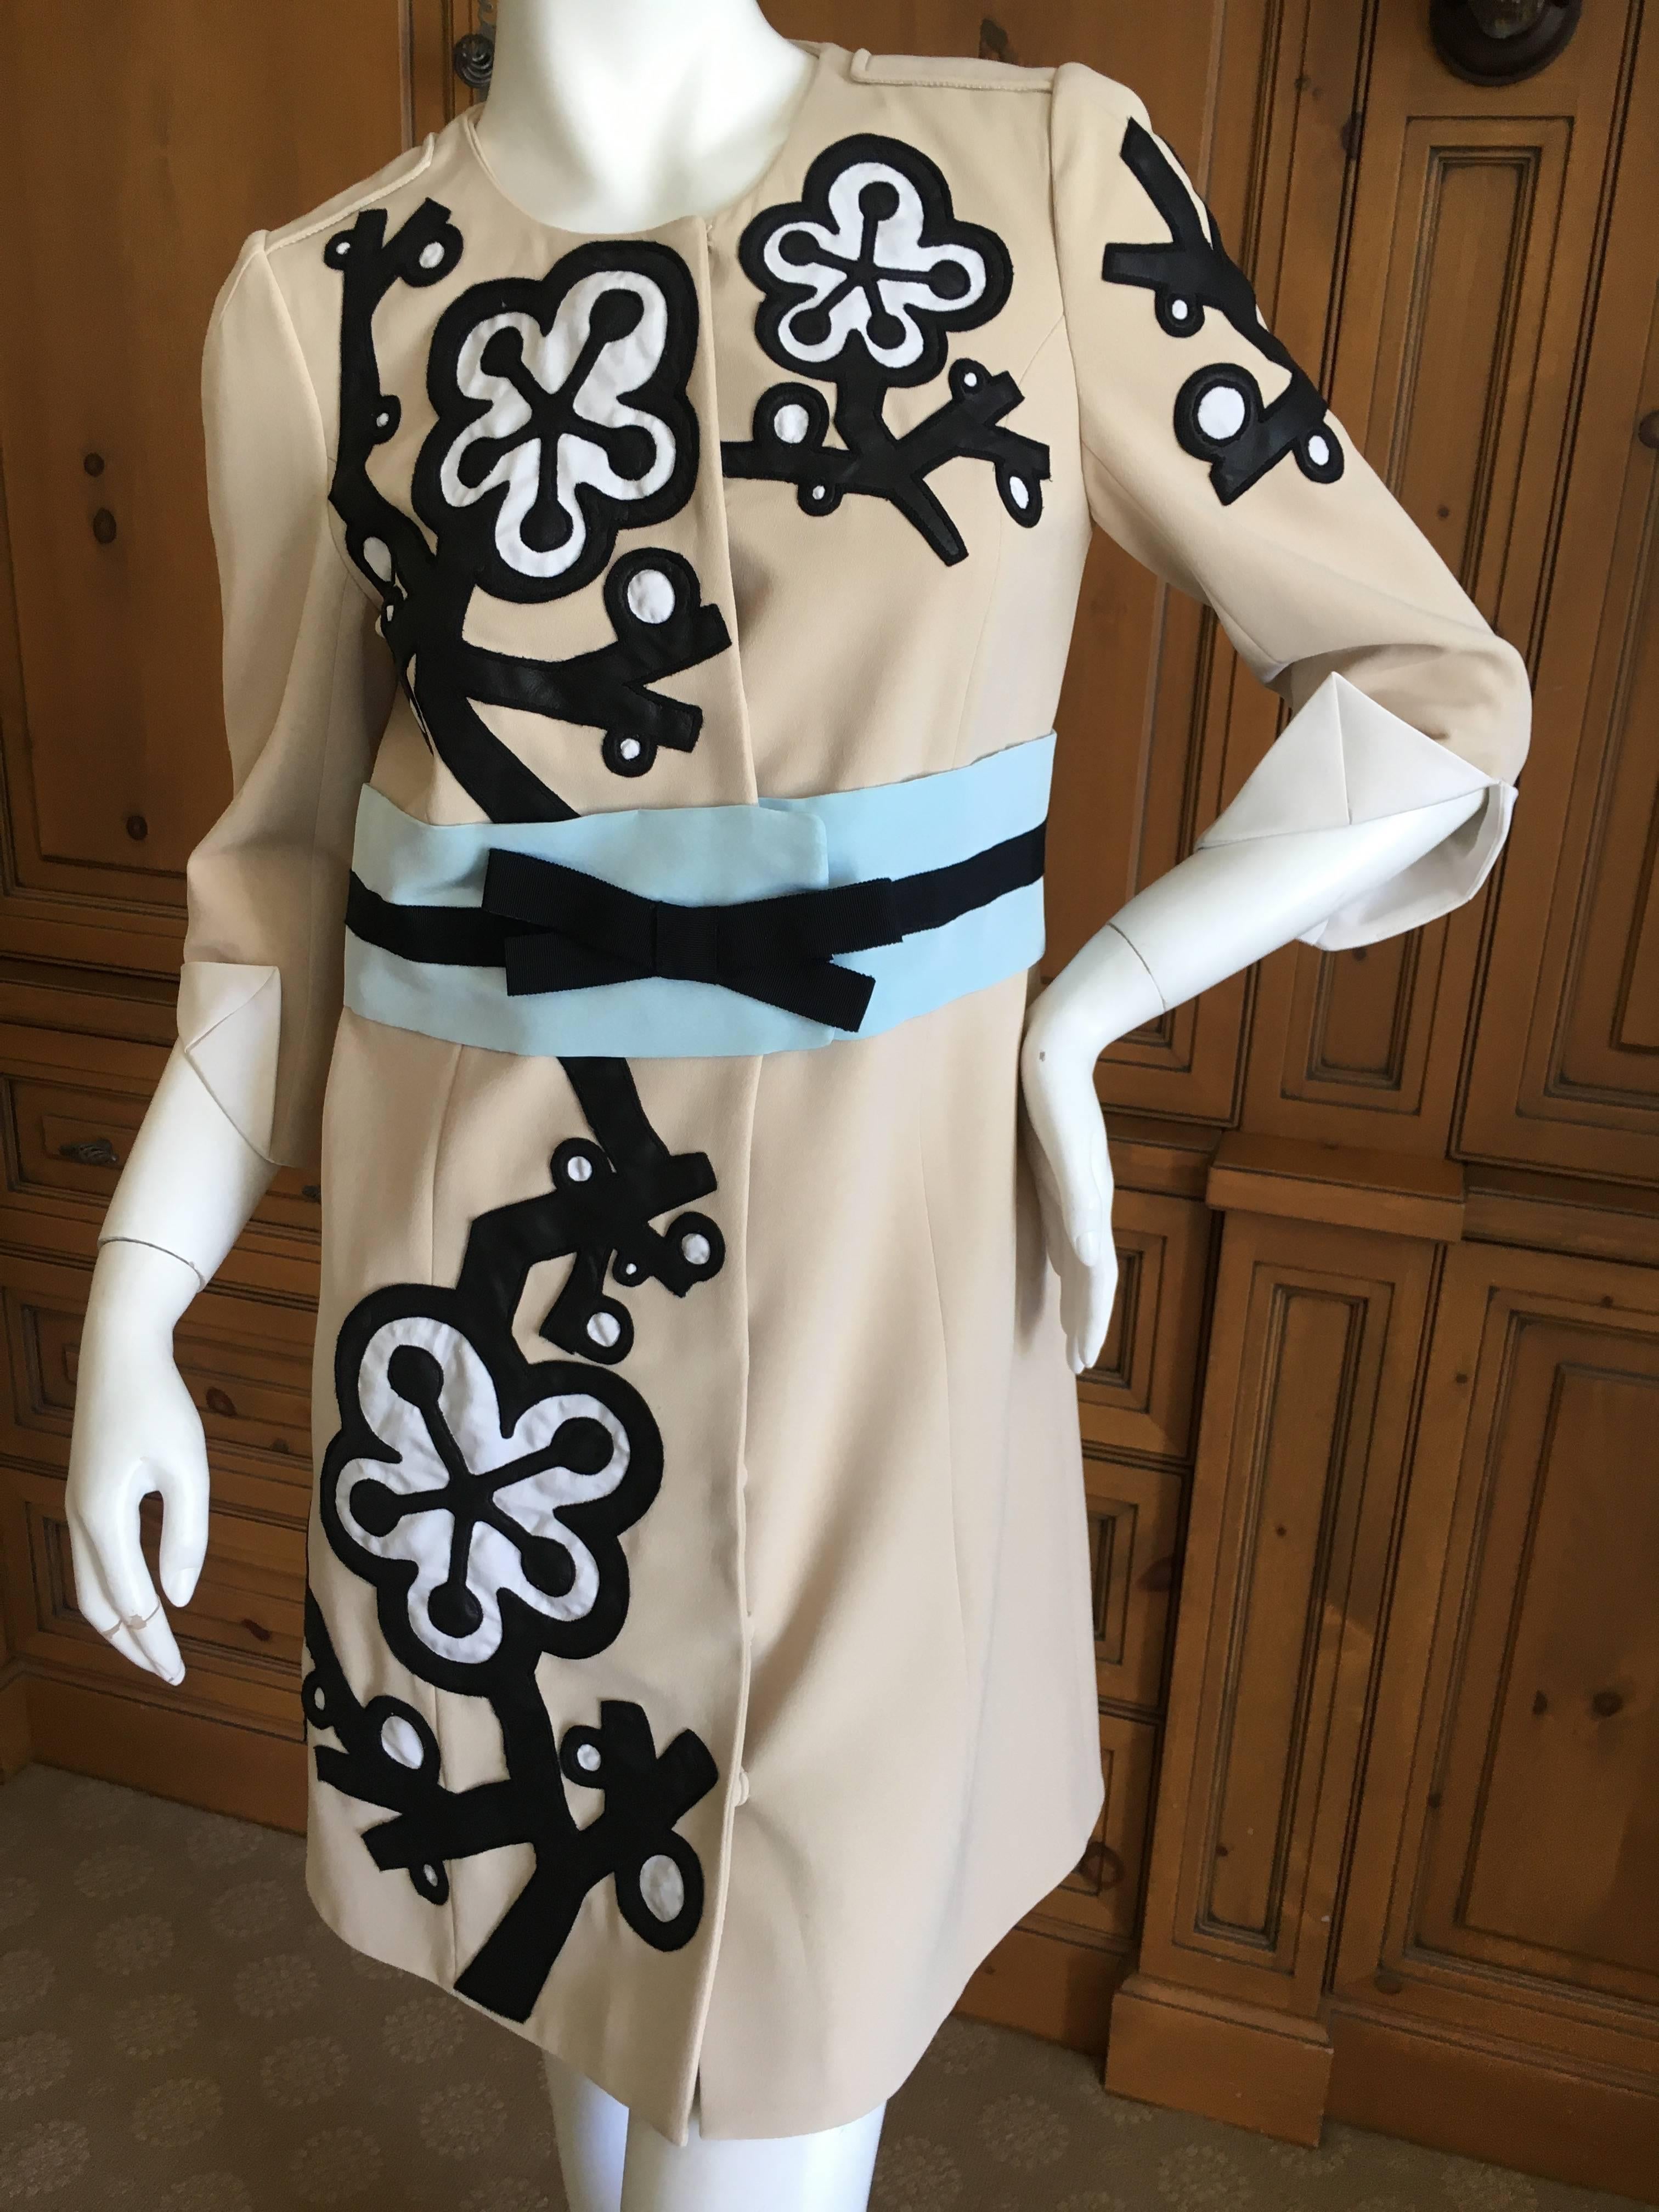 Andrew Gn Paris Graphic Belted Coat
Size 36
Bust 36"
Waist 32"
Hips 40"
Length 37"
Excellent condition